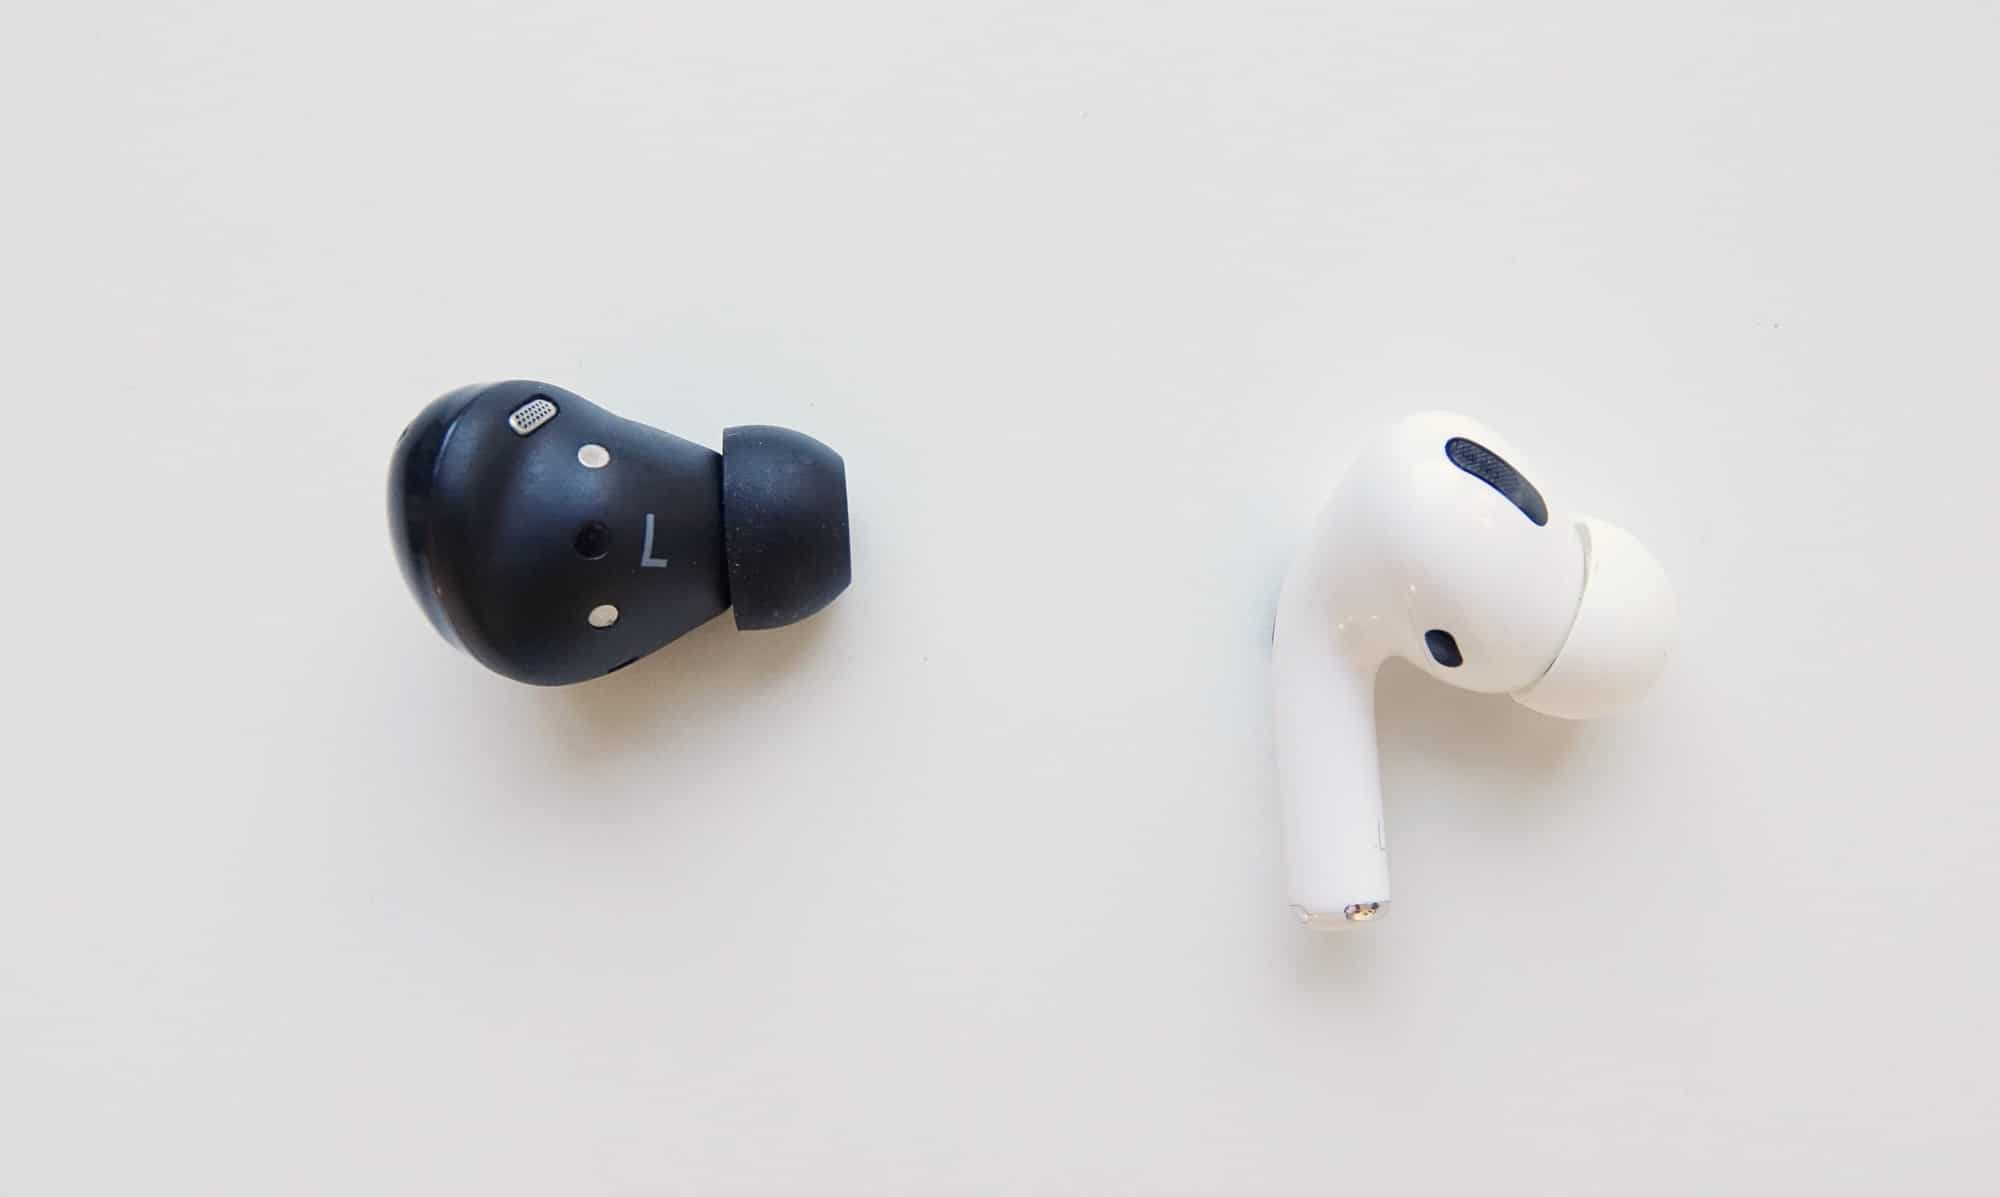 Samsung Galaxy Buds Pro (left) vs Apple AirPods Pro (right)